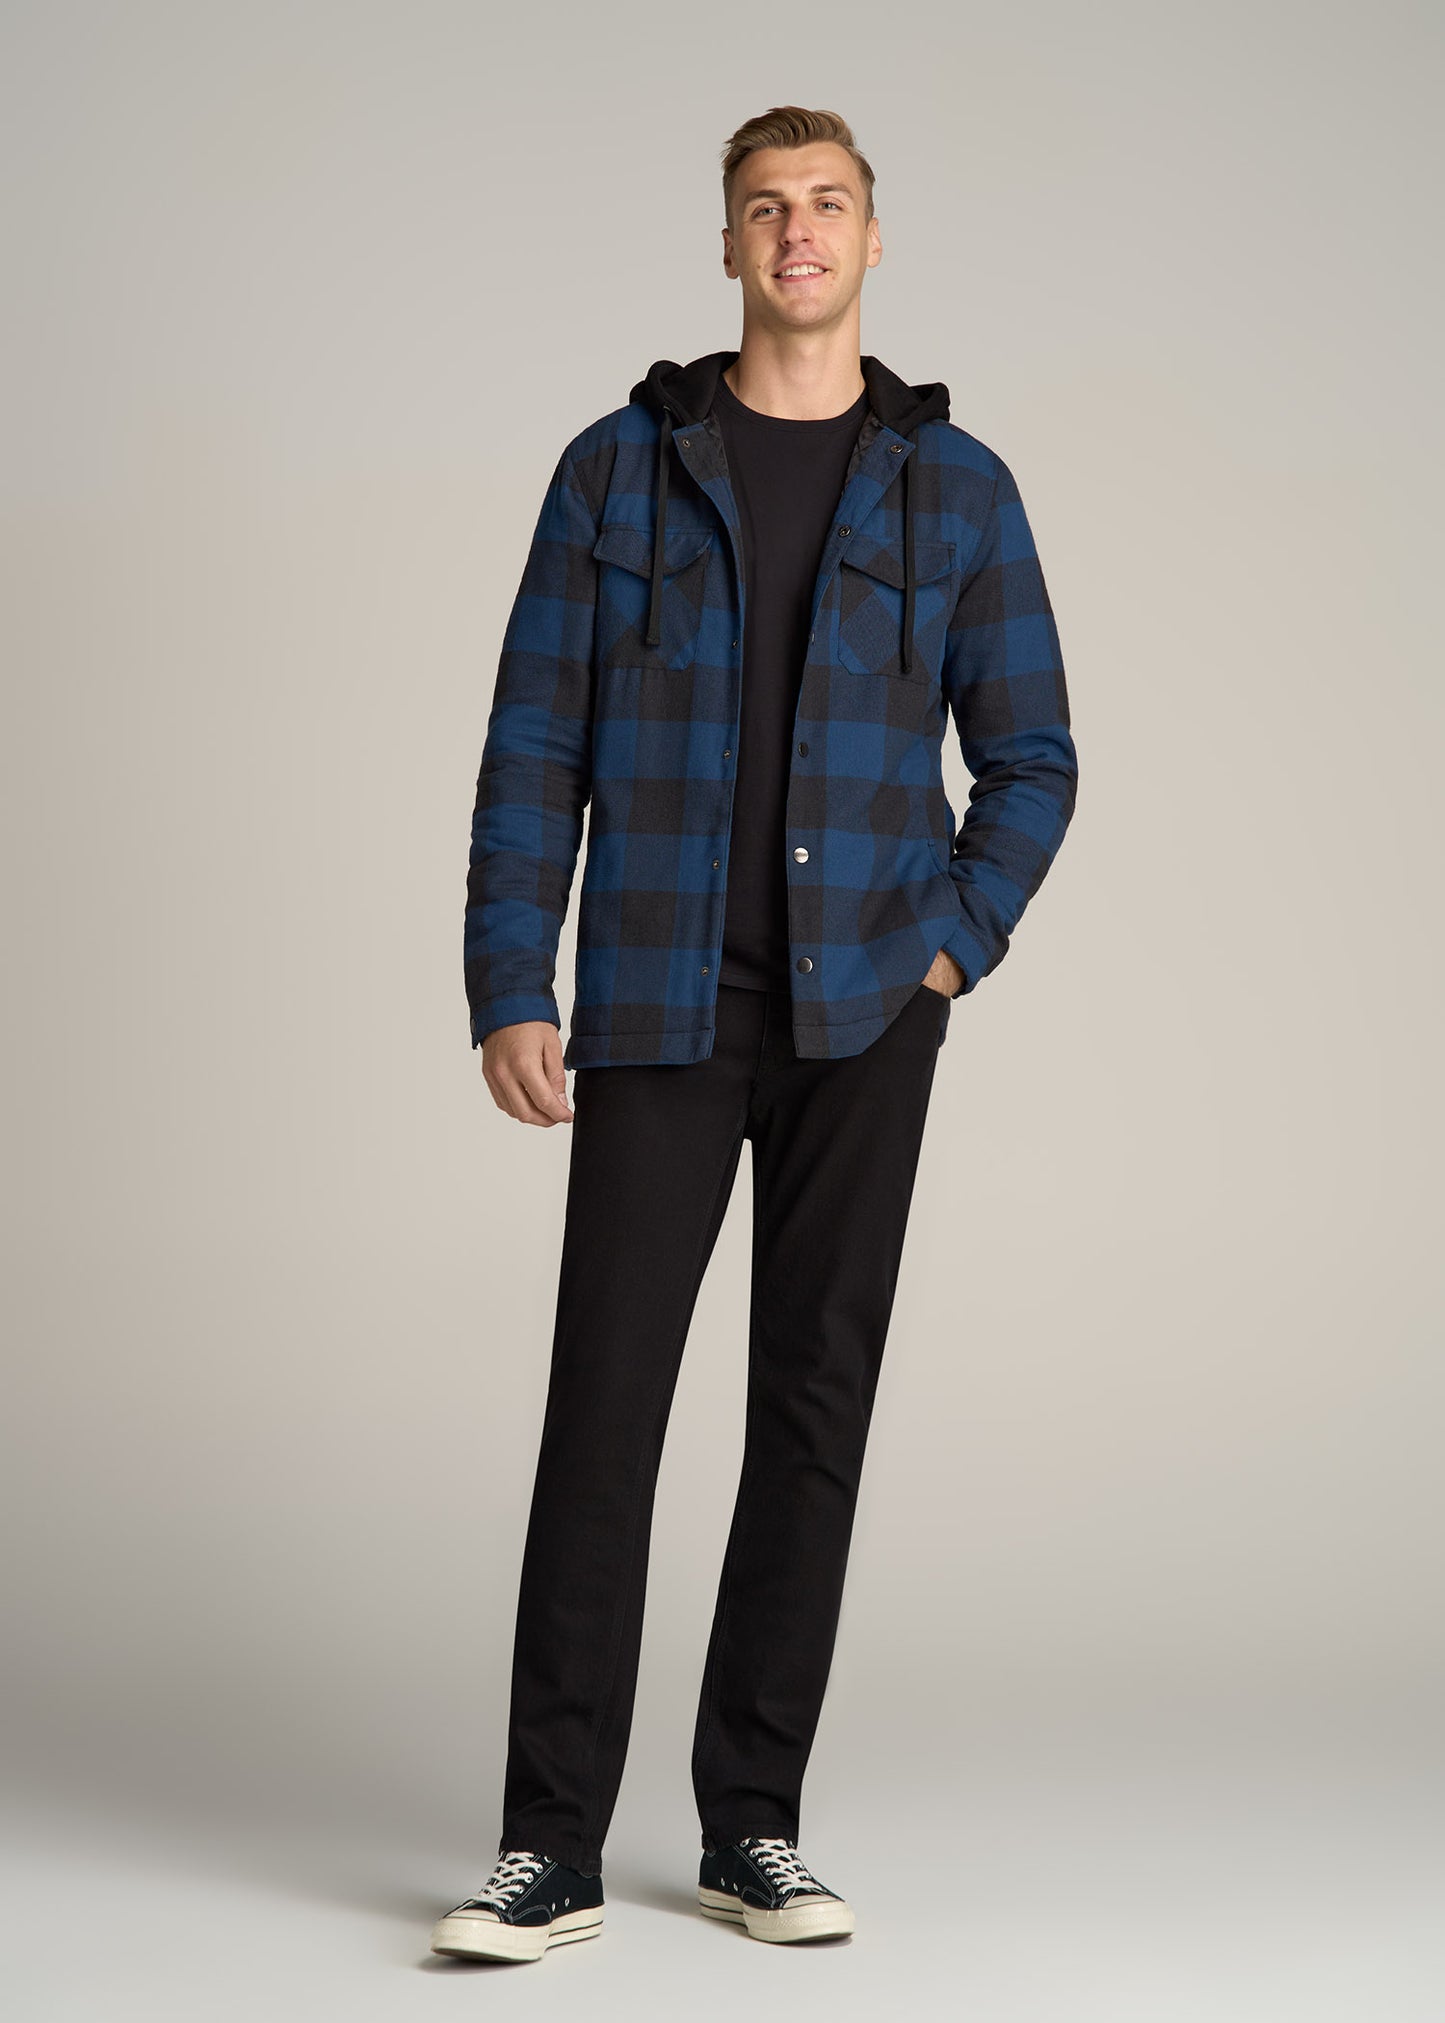 Hooded Flannel Shirt Jacket for Tall Men in Black and Blue Check XL / Tall / Black and Blue Check